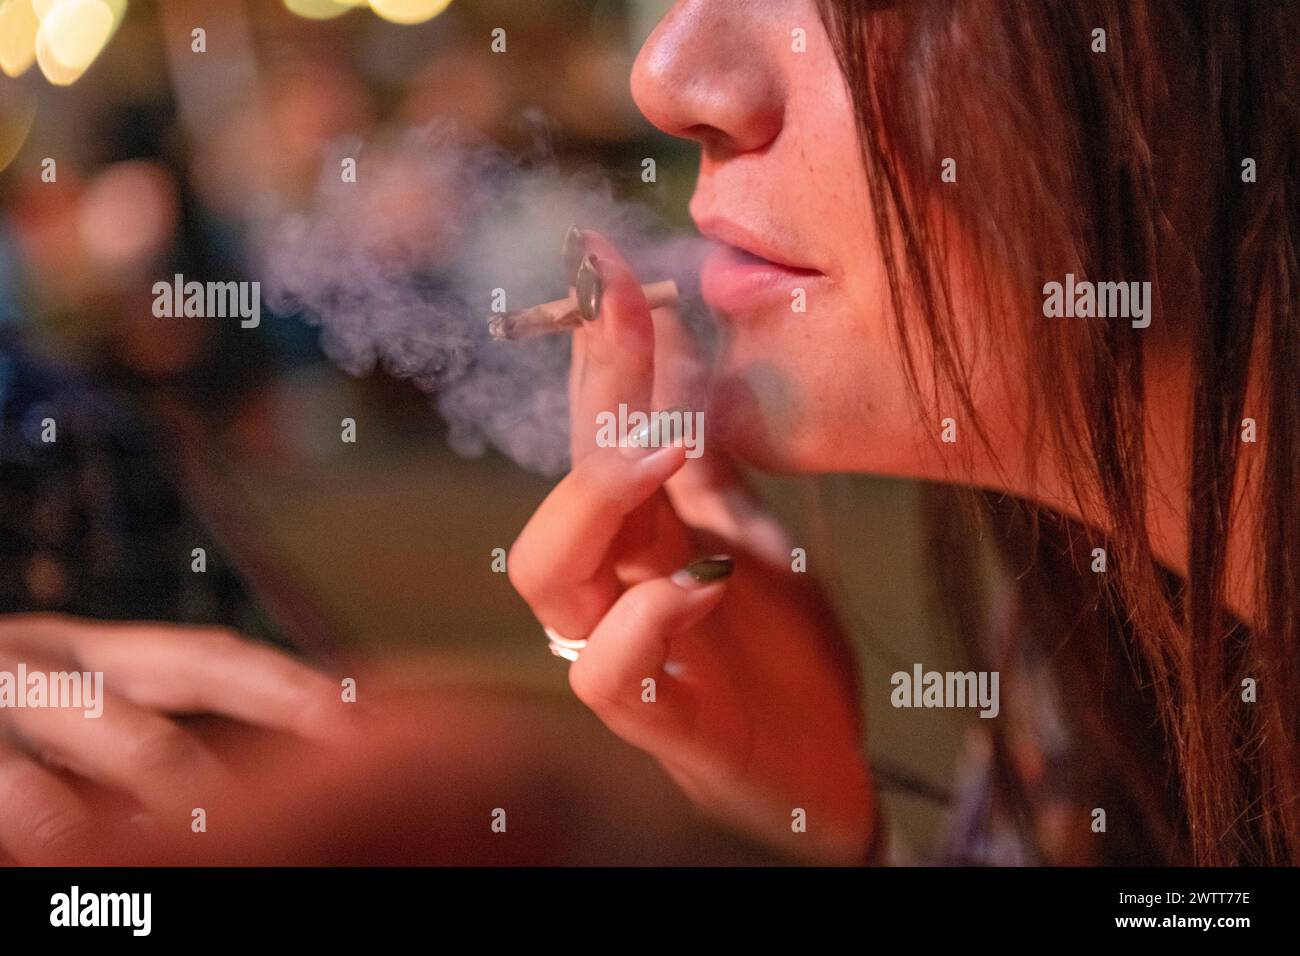 A young woman exhaling smoke from a lit cigarette at night. Stock Photo